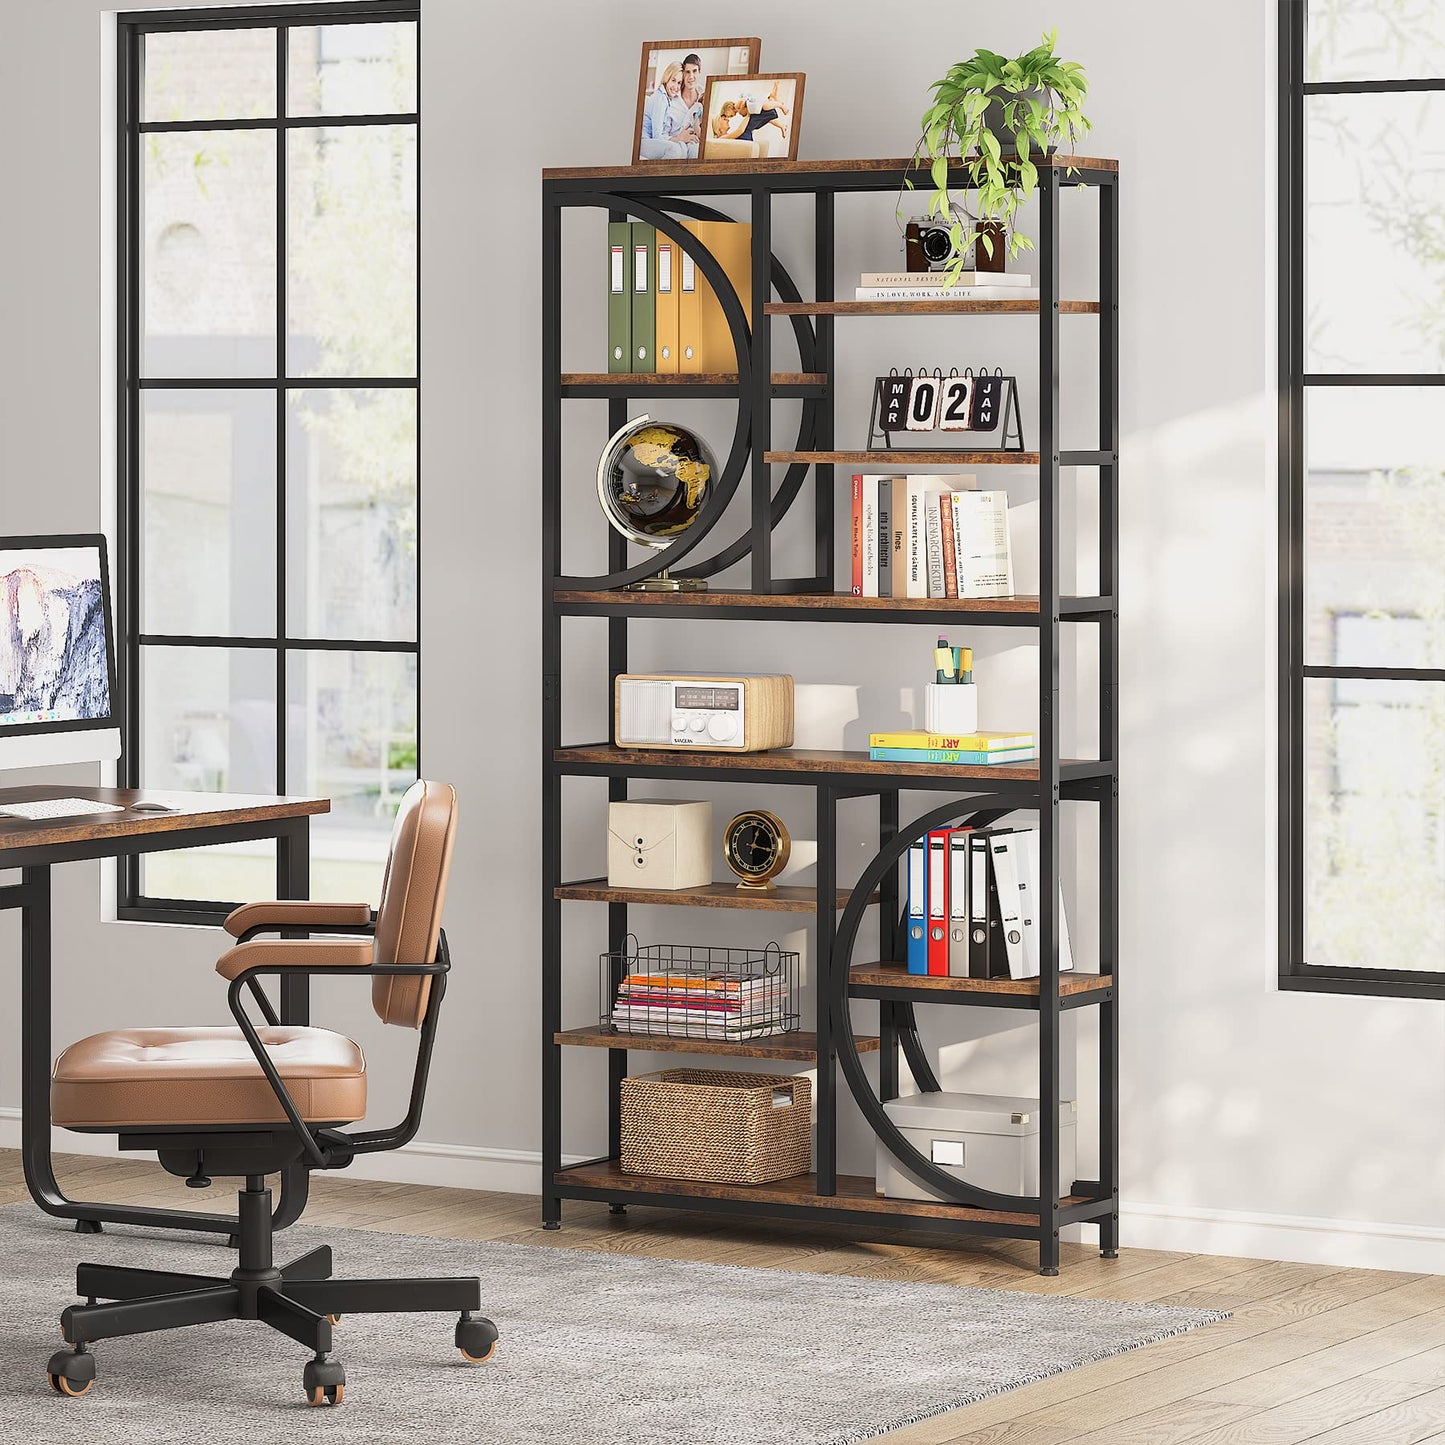 Tribesigns Bookshelf, Industrial 8-Tier Etagere Bookcases, 77-Inch Tall Book Shelf Open Display Shelves, Wood Look Accent Shelving Unit with Metal Frame for Home Office (1, Brown/Black)